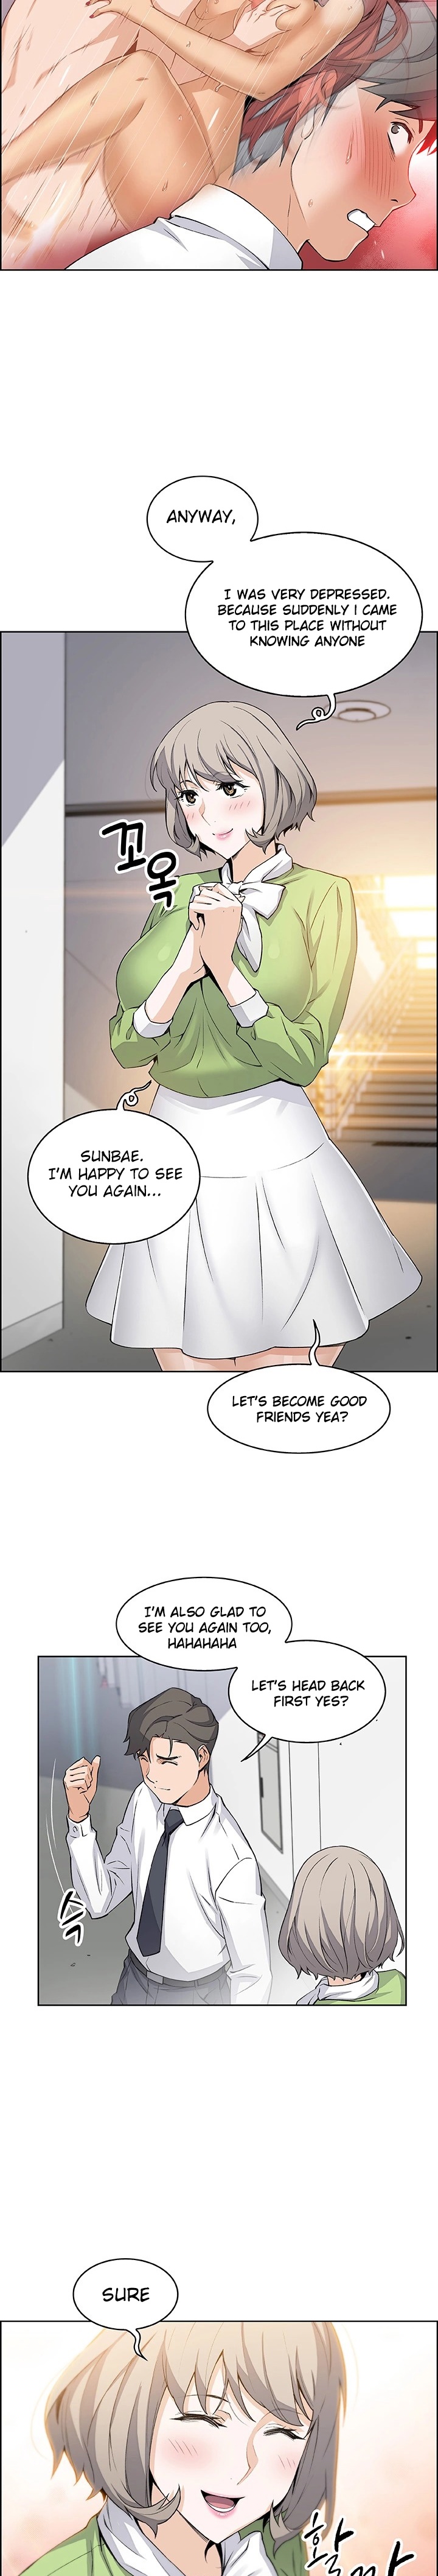 Housekeeper - Chapter 15 Page 5